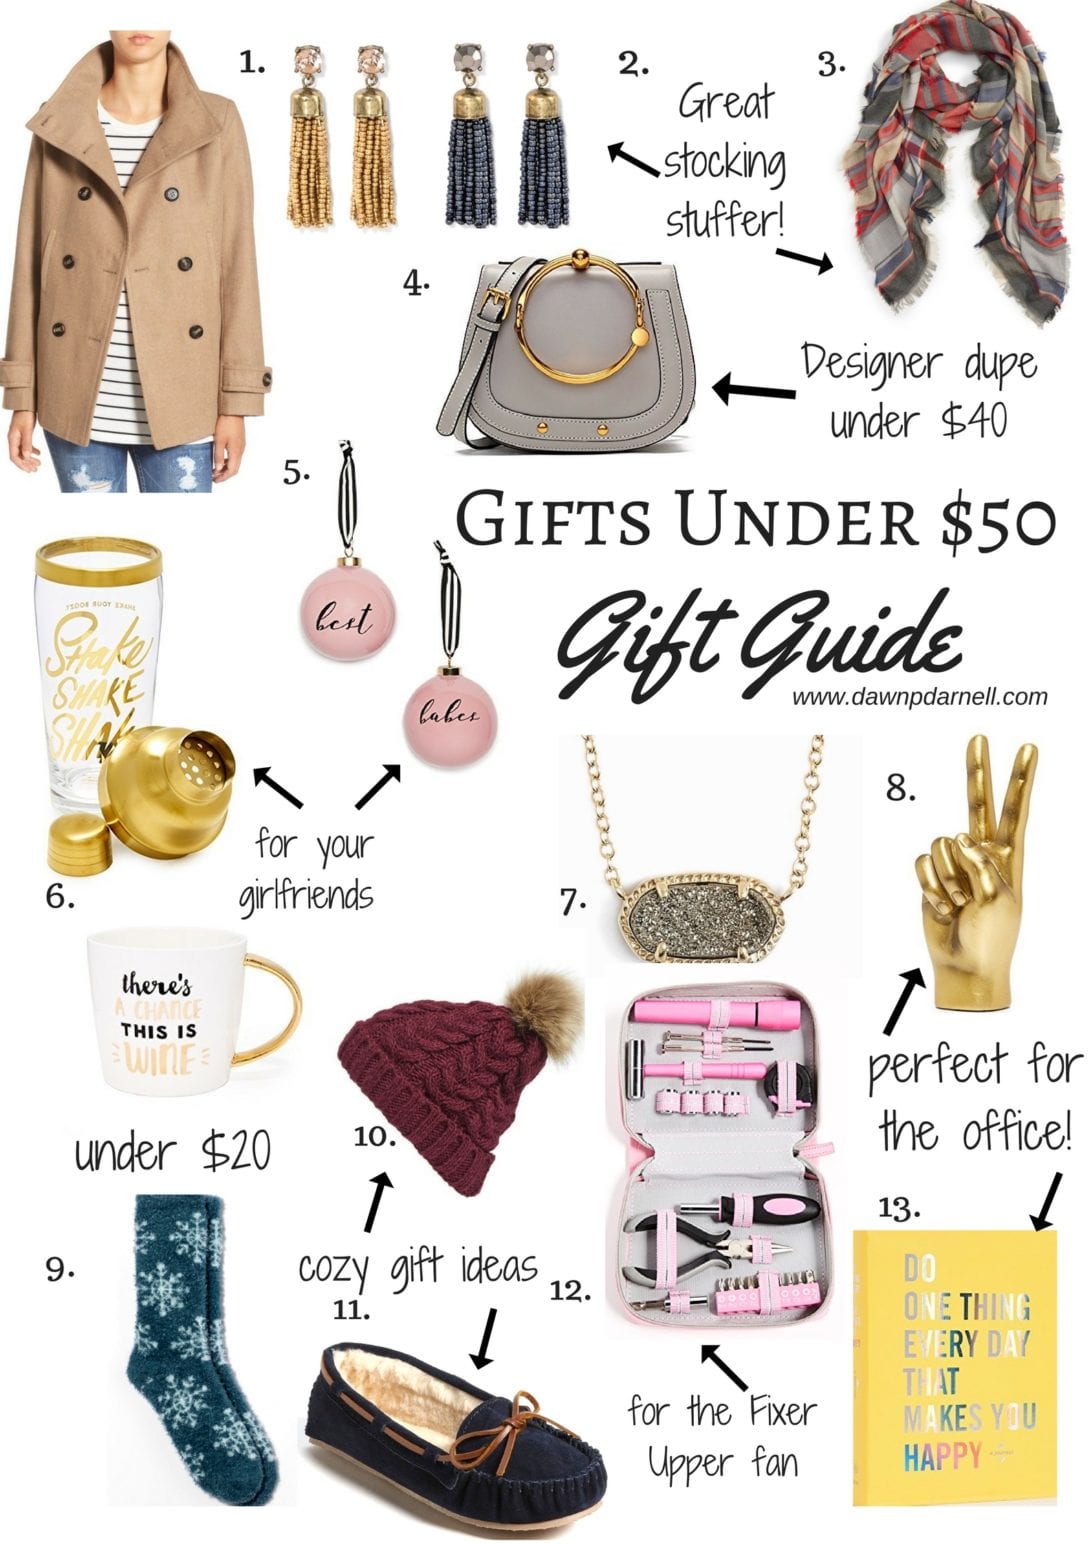 Gifts Under $50 Gift Guide  1. Double Breasted Peacoat  2. SUGARFIX by BaubleBar™ Beaded Tassel Earring Set 3. Plaid Oblong Scarf 4. Crossbody Ring Handle Bag 5. Best Babes Ornament Set 6. Shake Shake Shake Cocktail Shaker  Chance This Is Wine Mug 7. Elisa Pendant Necklace 8. Peace Sign Table Decor 9. Plush Snowflake CrewSocks 10. Knit Beanie with Faux Fur Pompom 11. 'Cally' Slipper 12. Tool Kit 13. Do One Thing Every Day That Makes You Happy, christmas gift guide